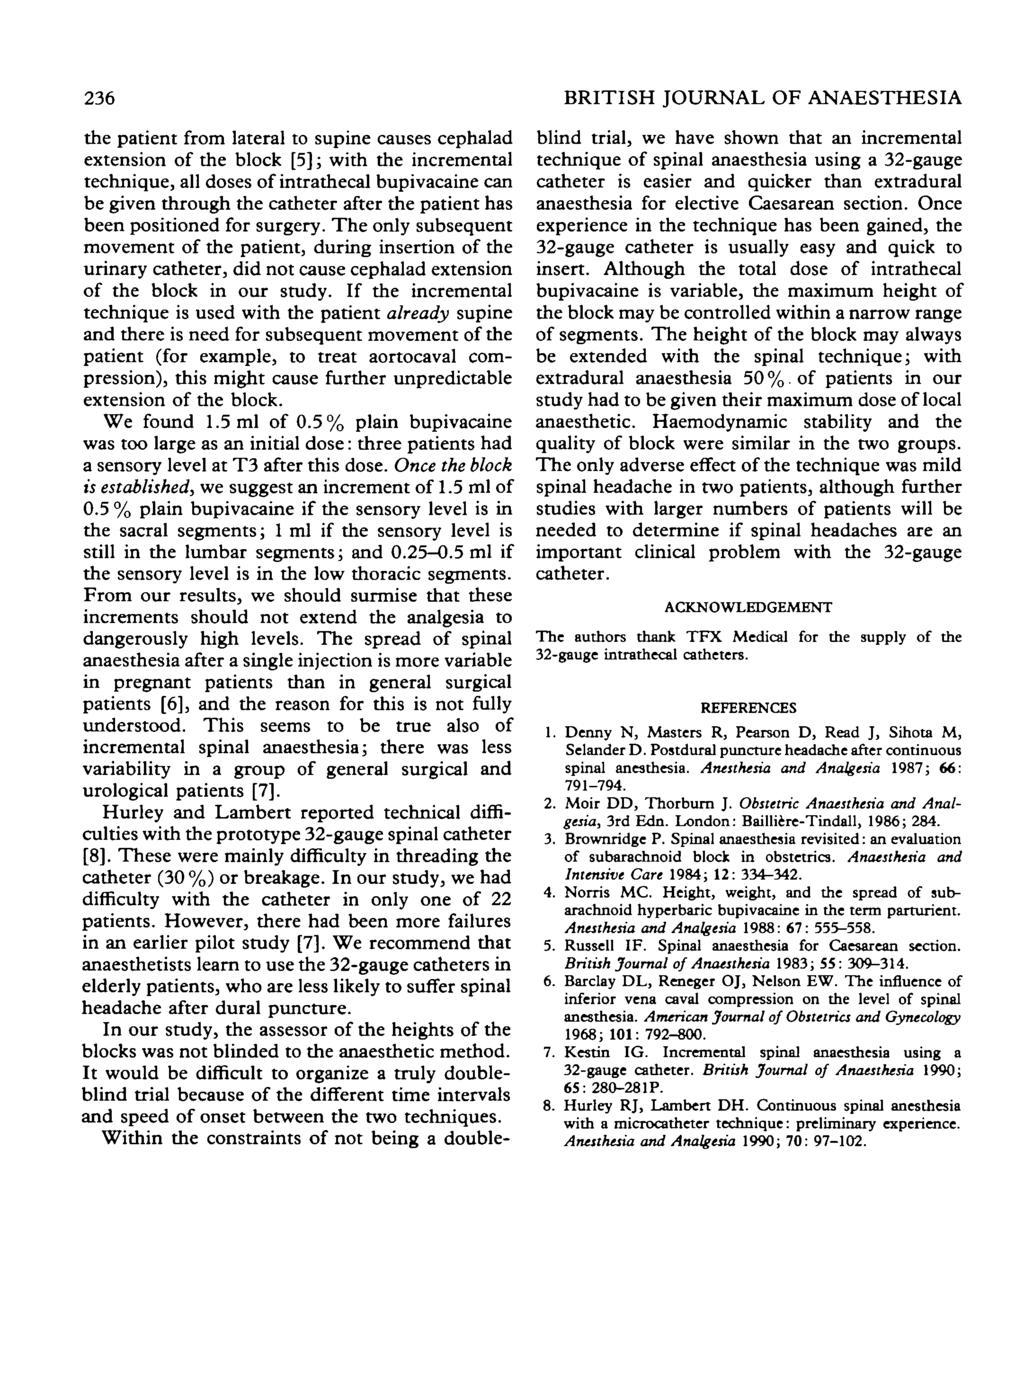 236 BRITISH JOURNAL OF ANAESTHESIA the patient from lateral to supine causes cephajad extension of the block [5]; with the incremental technique, all doses of intrathecal bupivacaine can be given